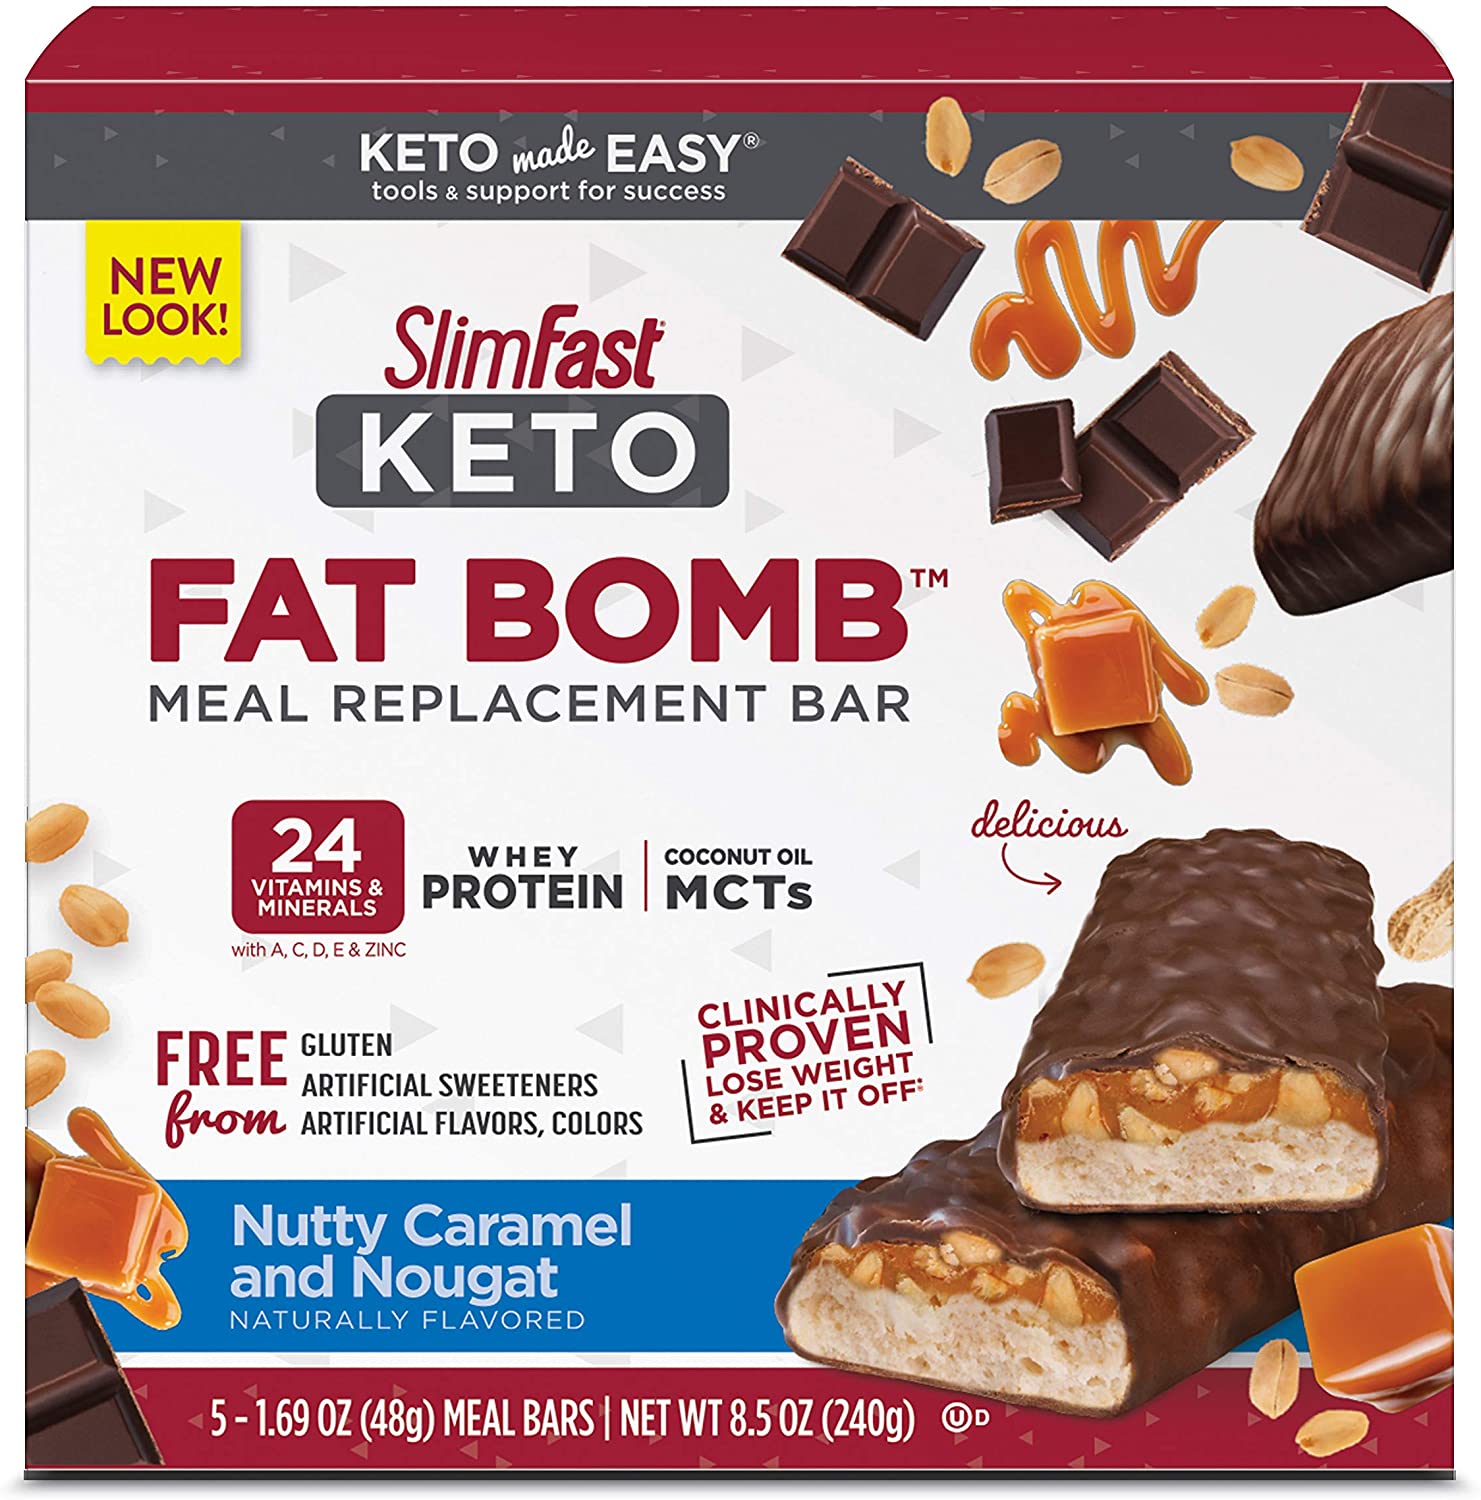 SlimFast Keto-Friendly Meal Replacement Bar